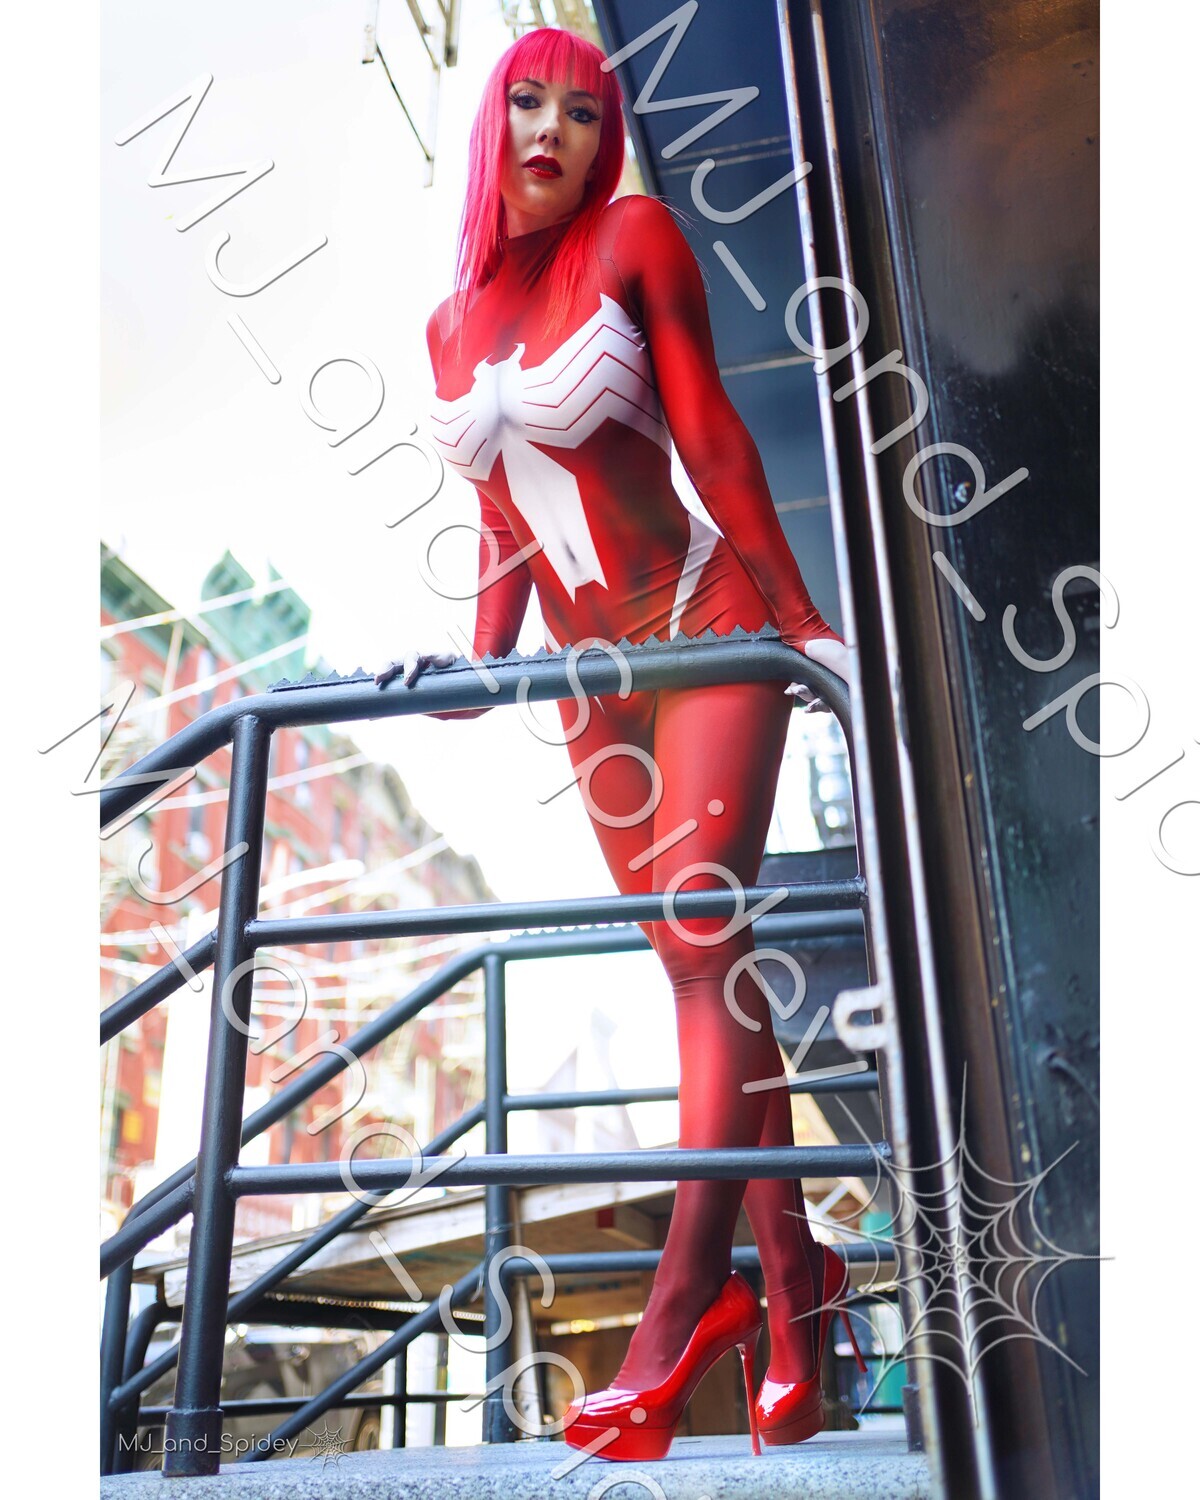 Marvel - Spider-Man - Mary Jane Watson - Ultimate Spider-Woman 3 - Digital Cosplay Image (@MJ_and_Spidey, MJ and Spidey, Comics)